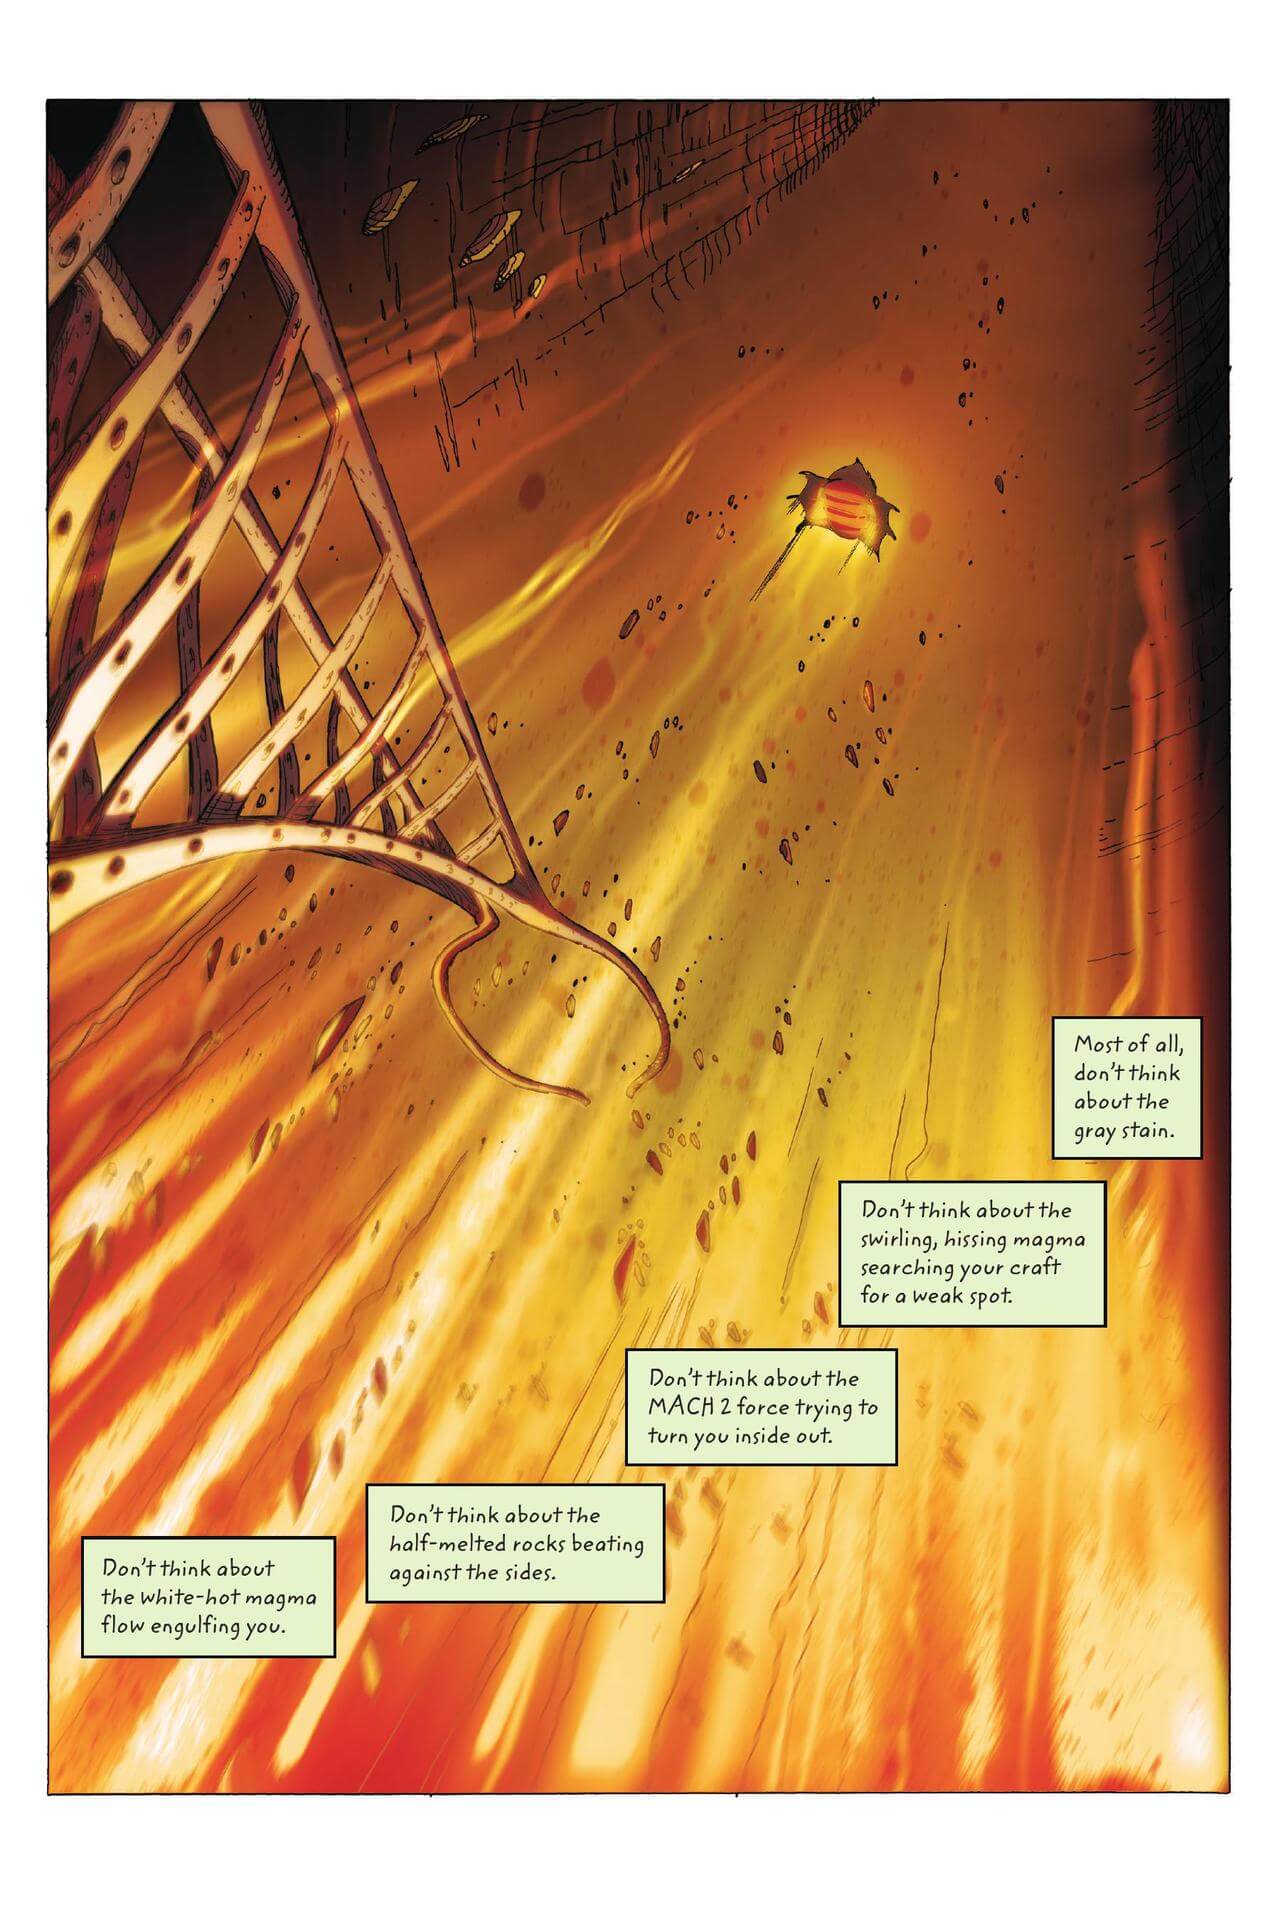 page 24 of artemis fowl the graphic novel